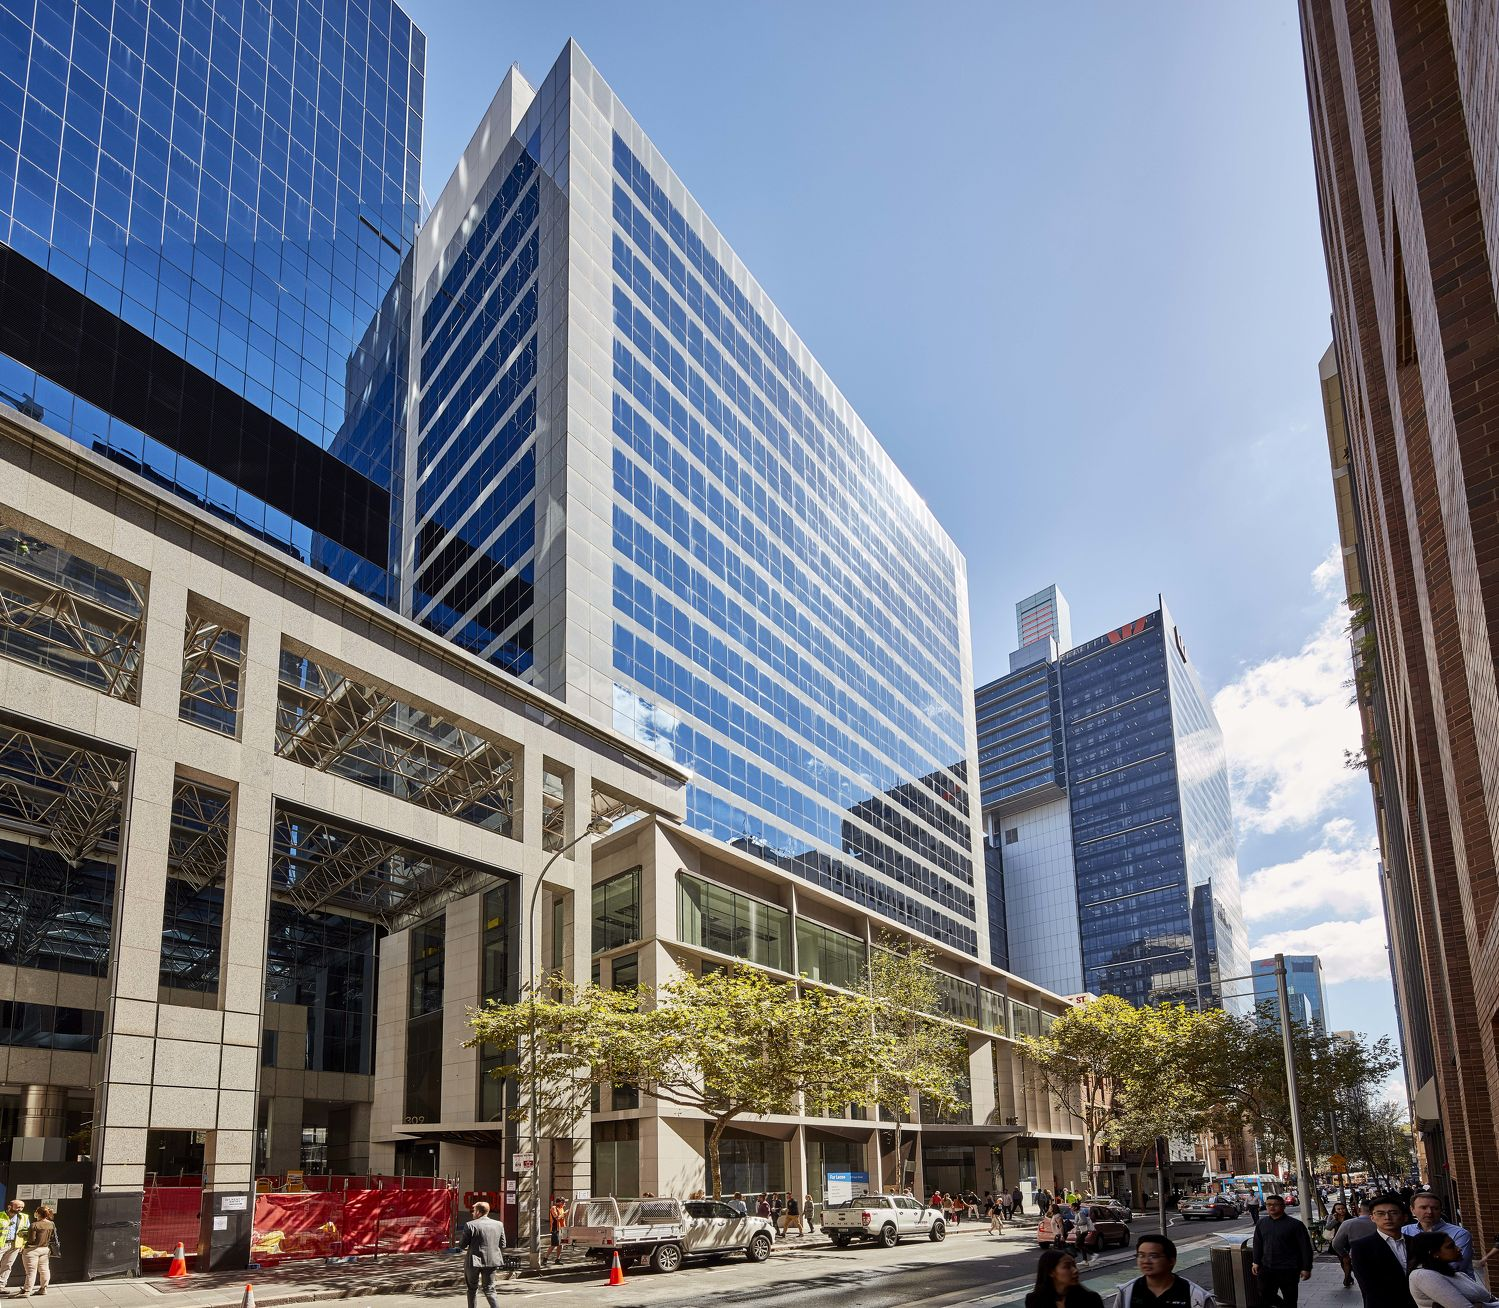 RealVantage’s most recent investment opportunity was for two Grade-A office towers located in the Sydney CBD, offering returns of 6% per annum